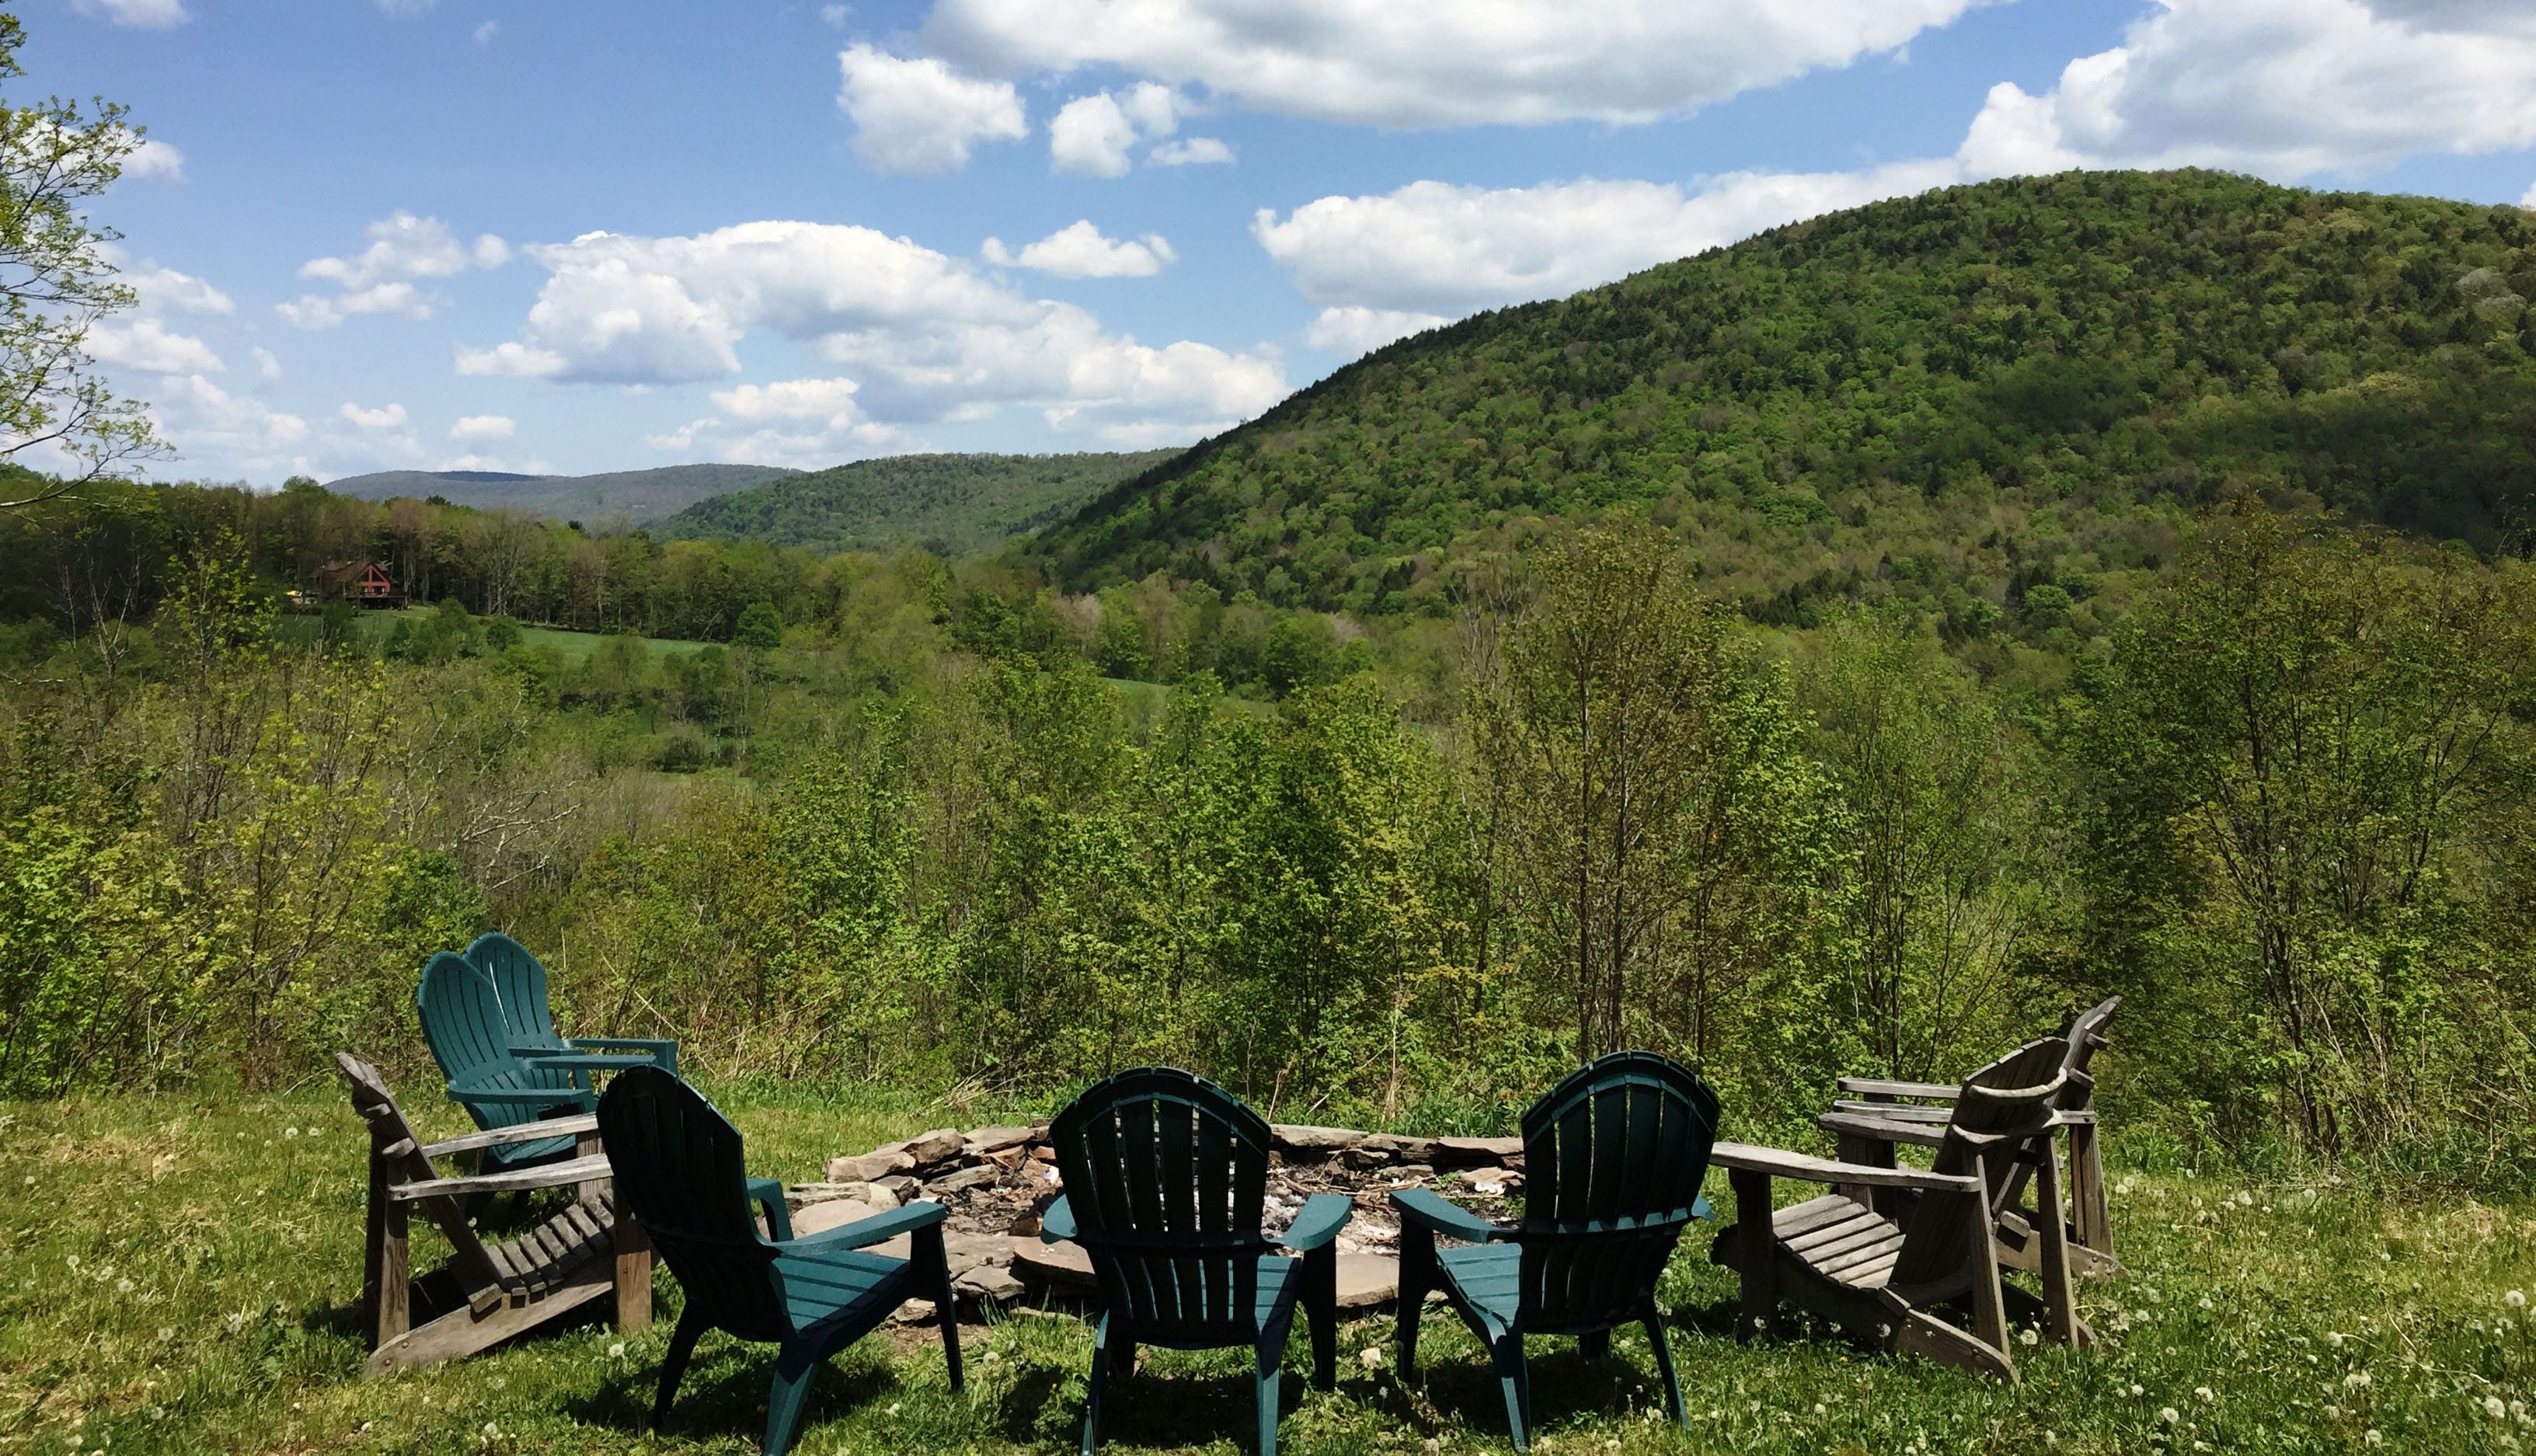 Catskills views from the outdoor fire pit